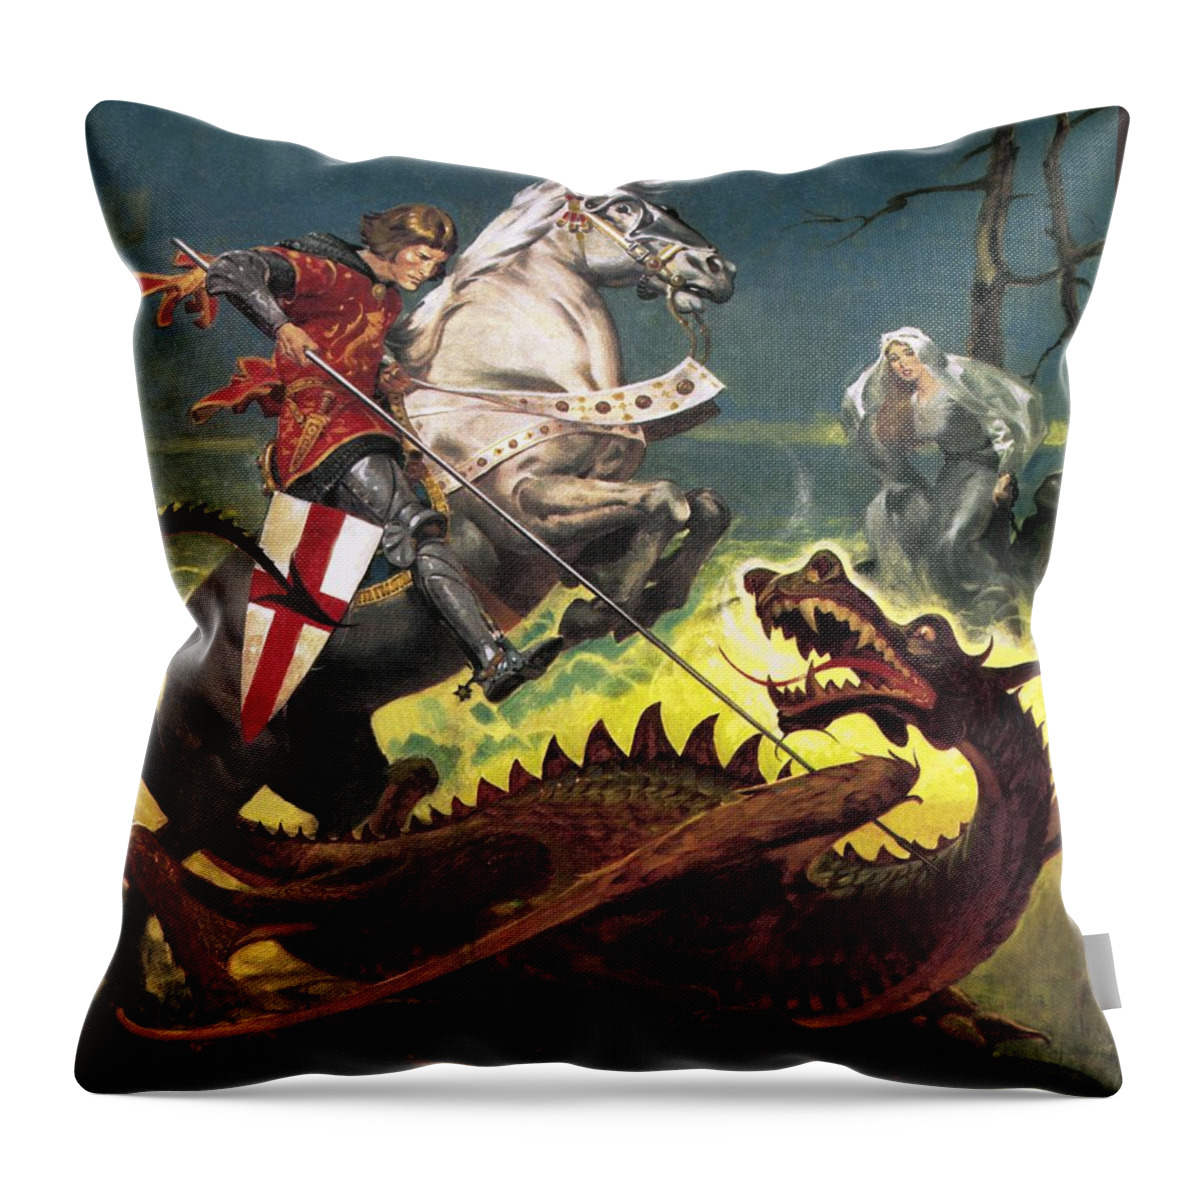 George Throw Pillow featuring the painting The Truth Behind The Legend St George - The Soldier Who Became A Saint by English School